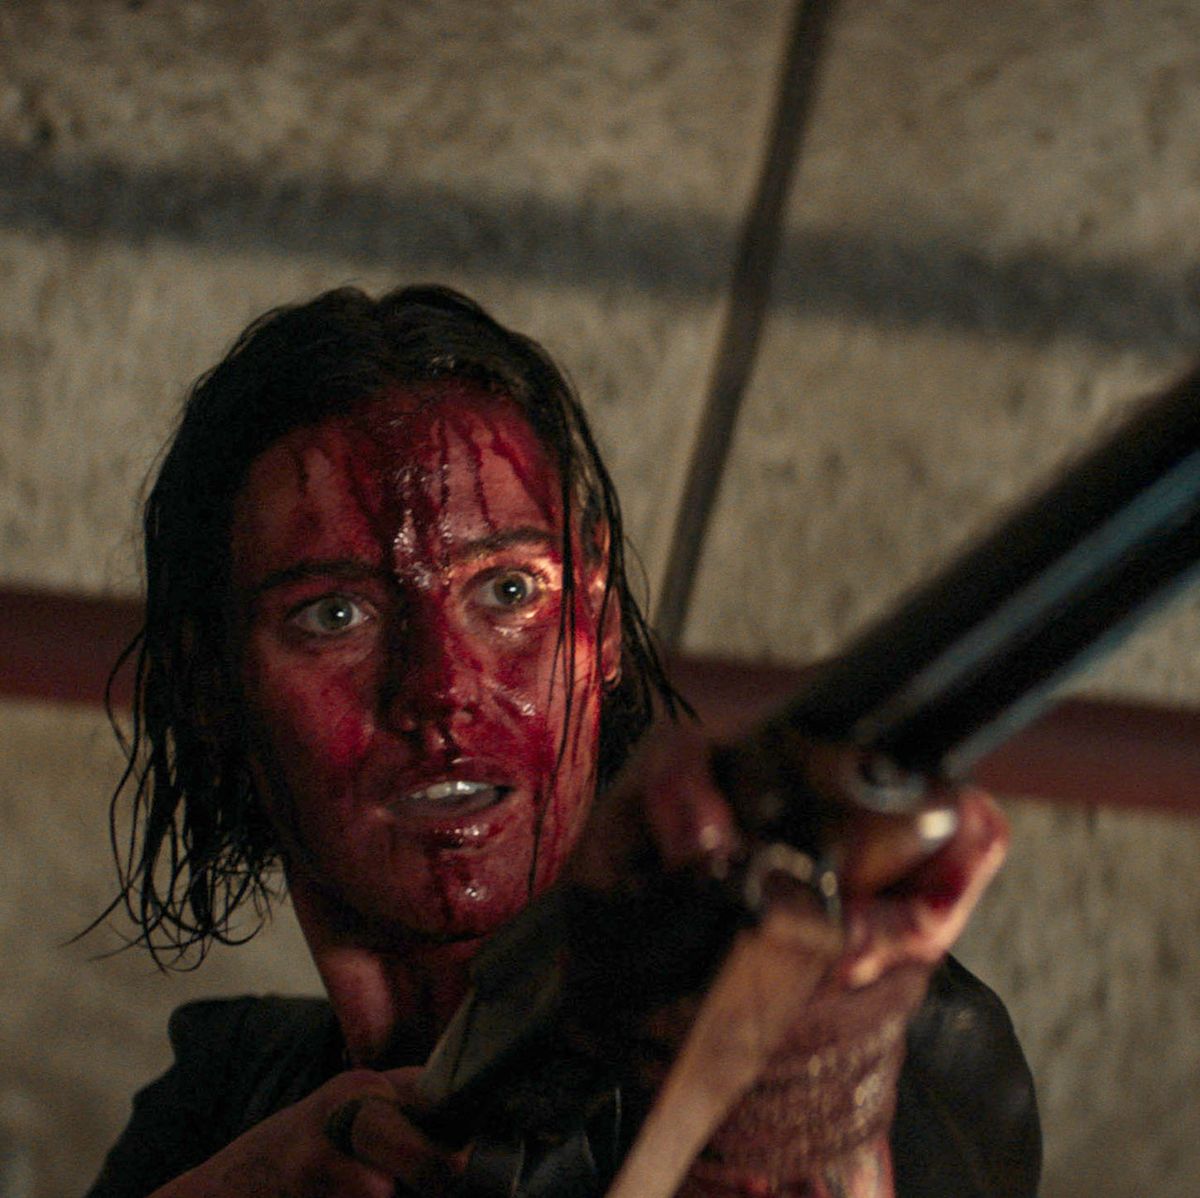 Evil Dead Rise to be the longest film in the franchise- Cinema express